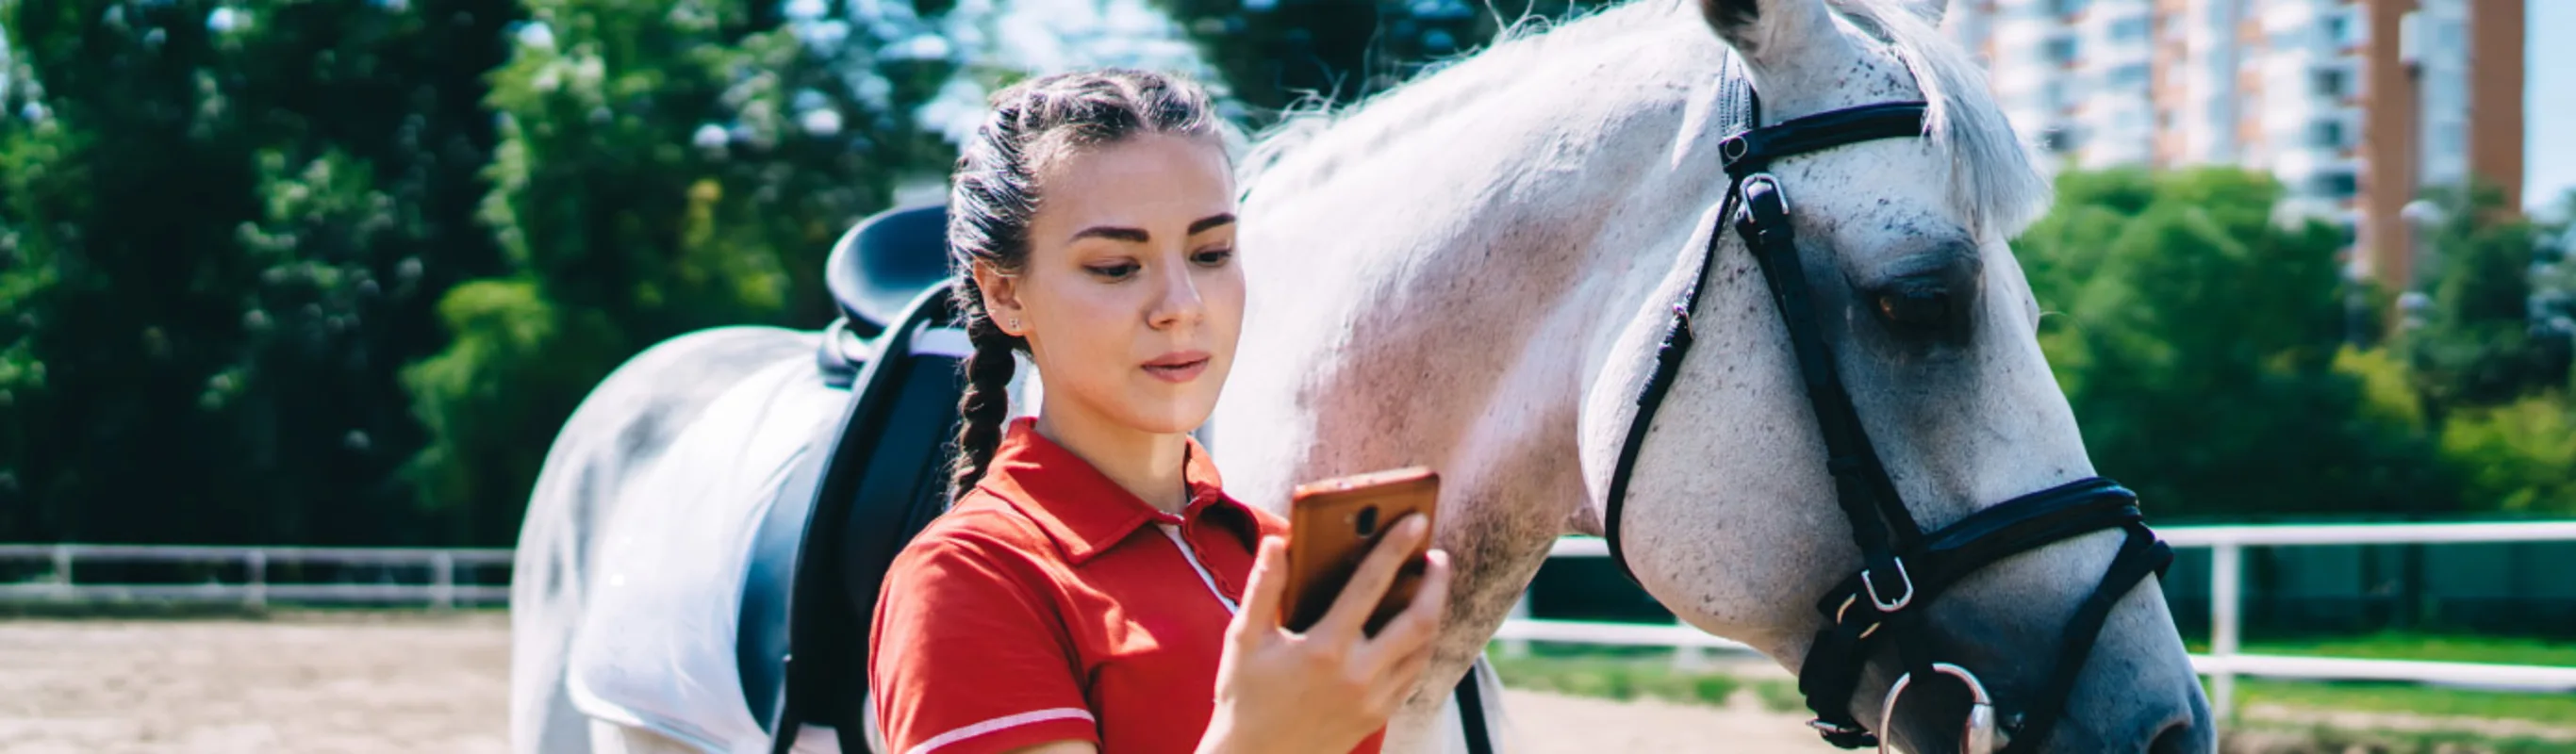 Girl with her cell phone and a horse